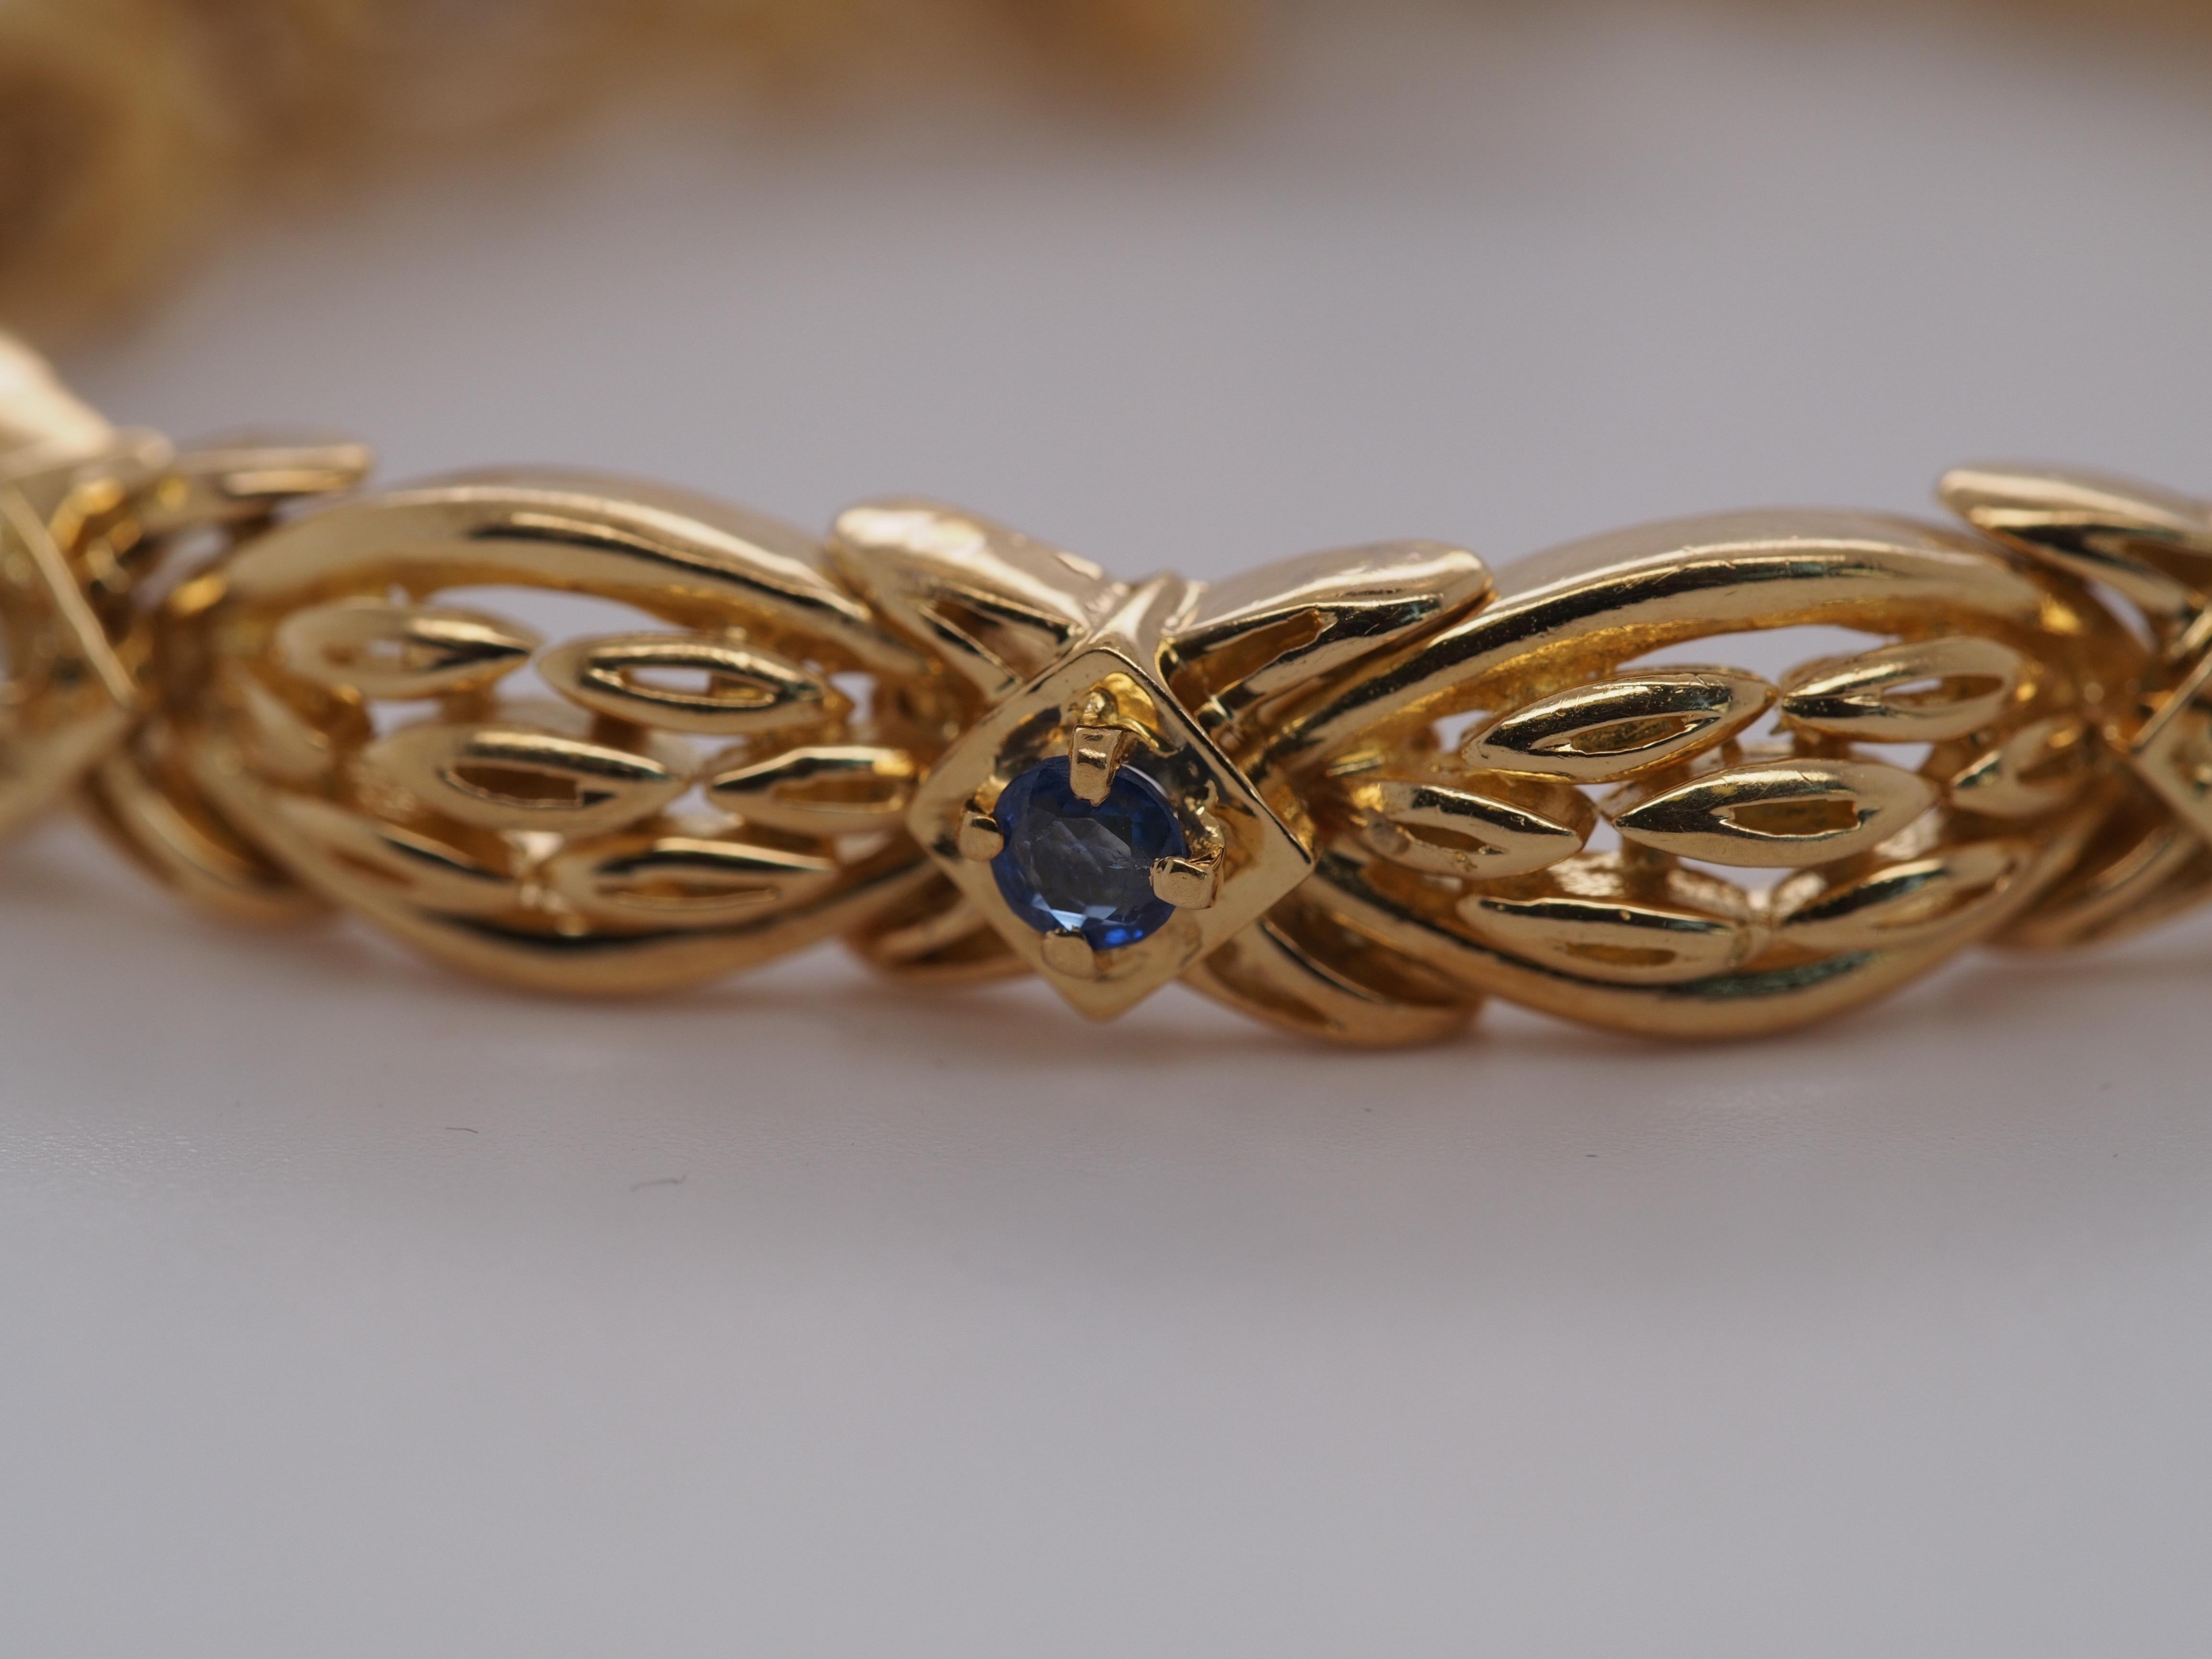 Item Details:
Metal Type: 18K Yellow Gold [Hallmarked, and Tested]
Weight: 36.8 grams (All Items Total)
Diamond Details: .55ct, total weight, F Color, VS Clarity, Round Brilliant Cut
Stone Details:
Weight: .60ct, total weight
Type: Sapphire
Cut: